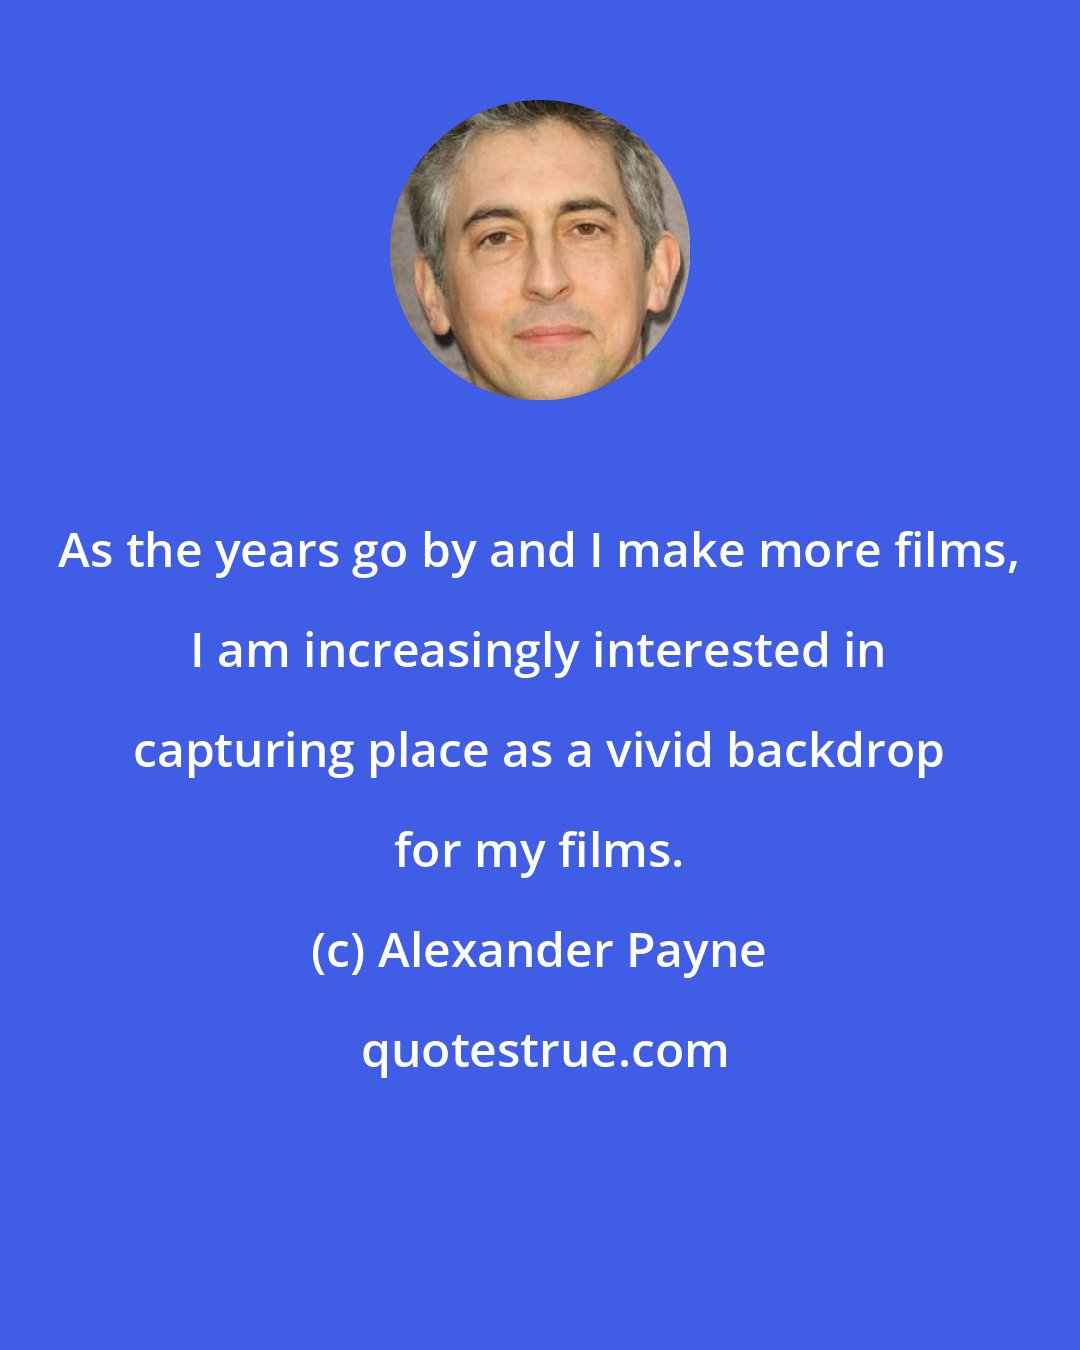 Alexander Payne: As the years go by and I make more films, I am increasingly interested in capturing place as a vivid backdrop for my films.